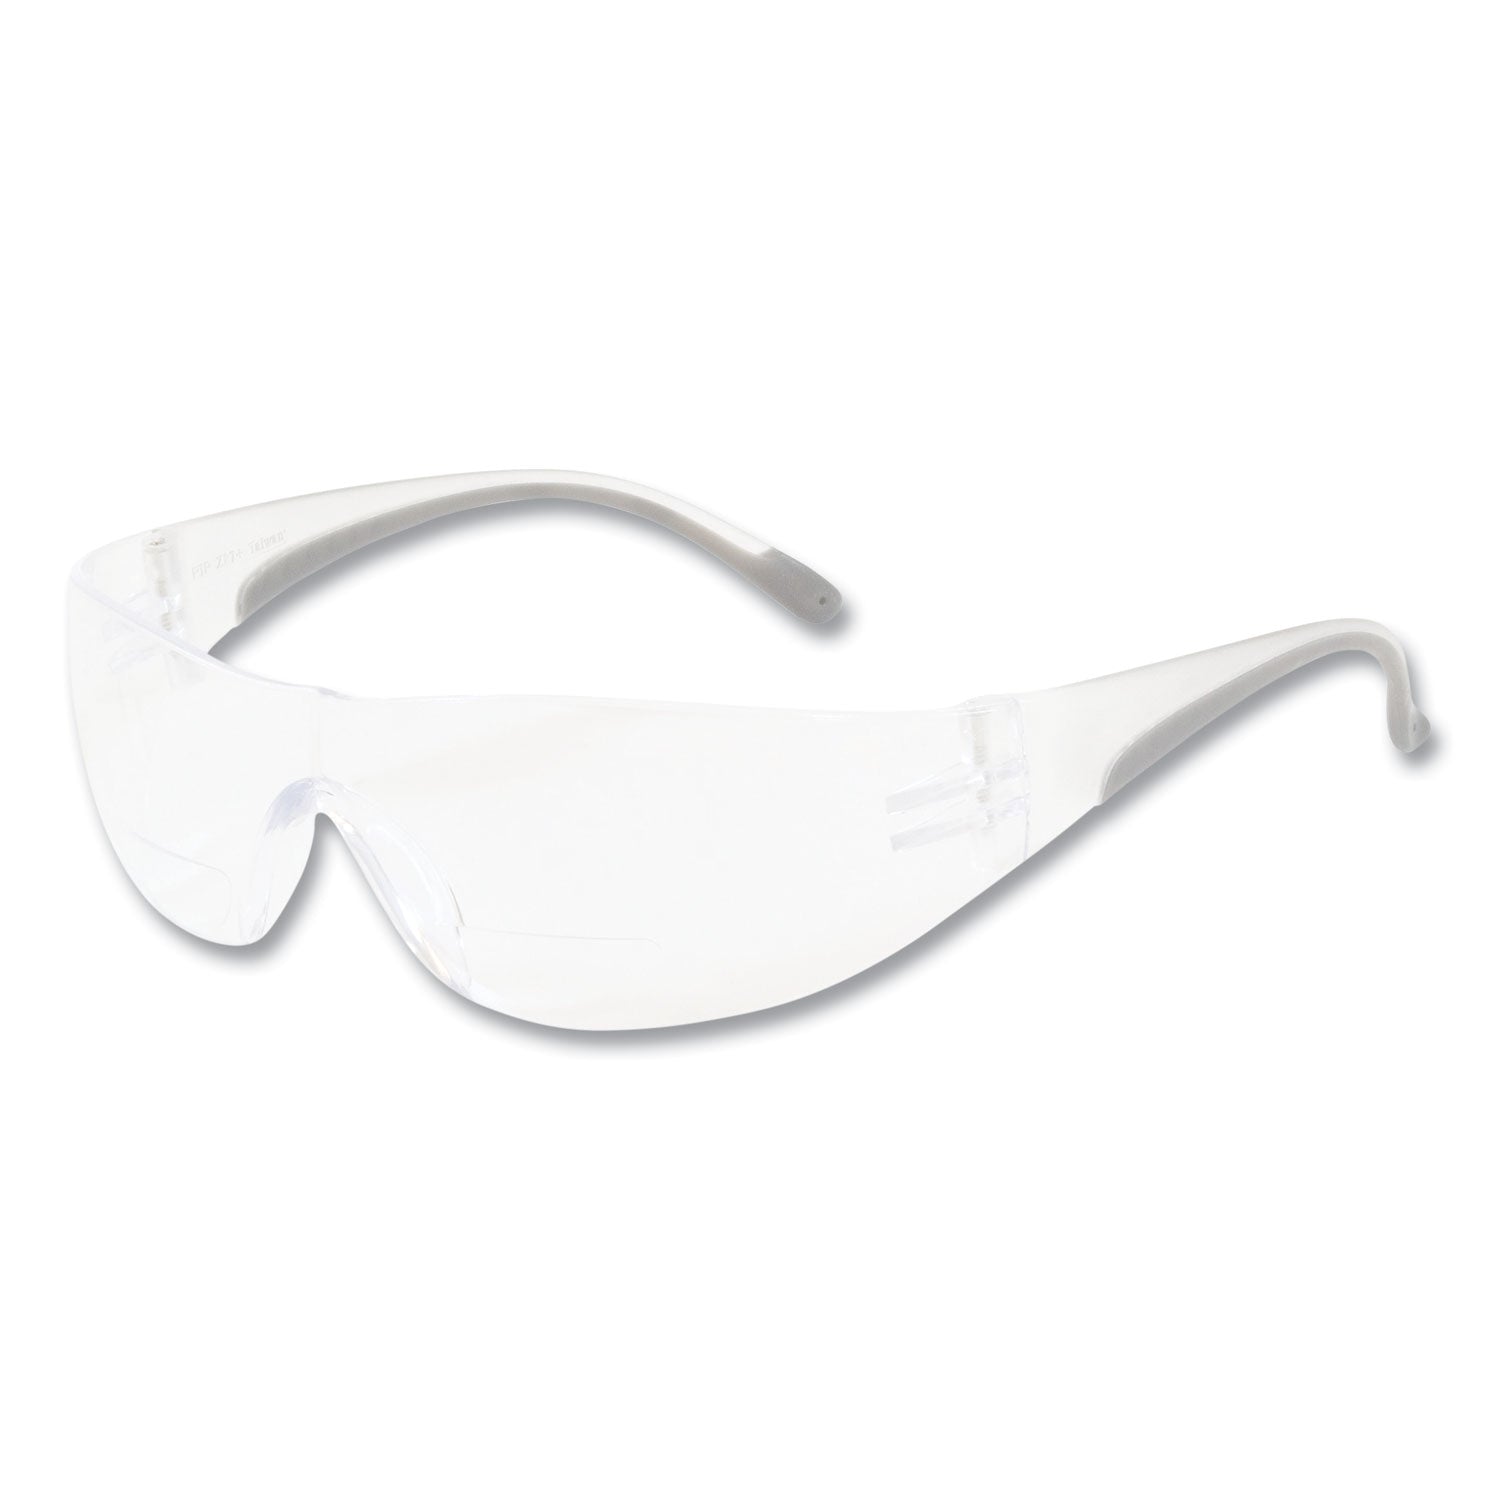 zenon-z12r-rimless-optical-eyewear-with-15-diopter-bifocal-reading-glass-design-scratch-resistant-clear-lens-clear-frame_pid250270015 - 1